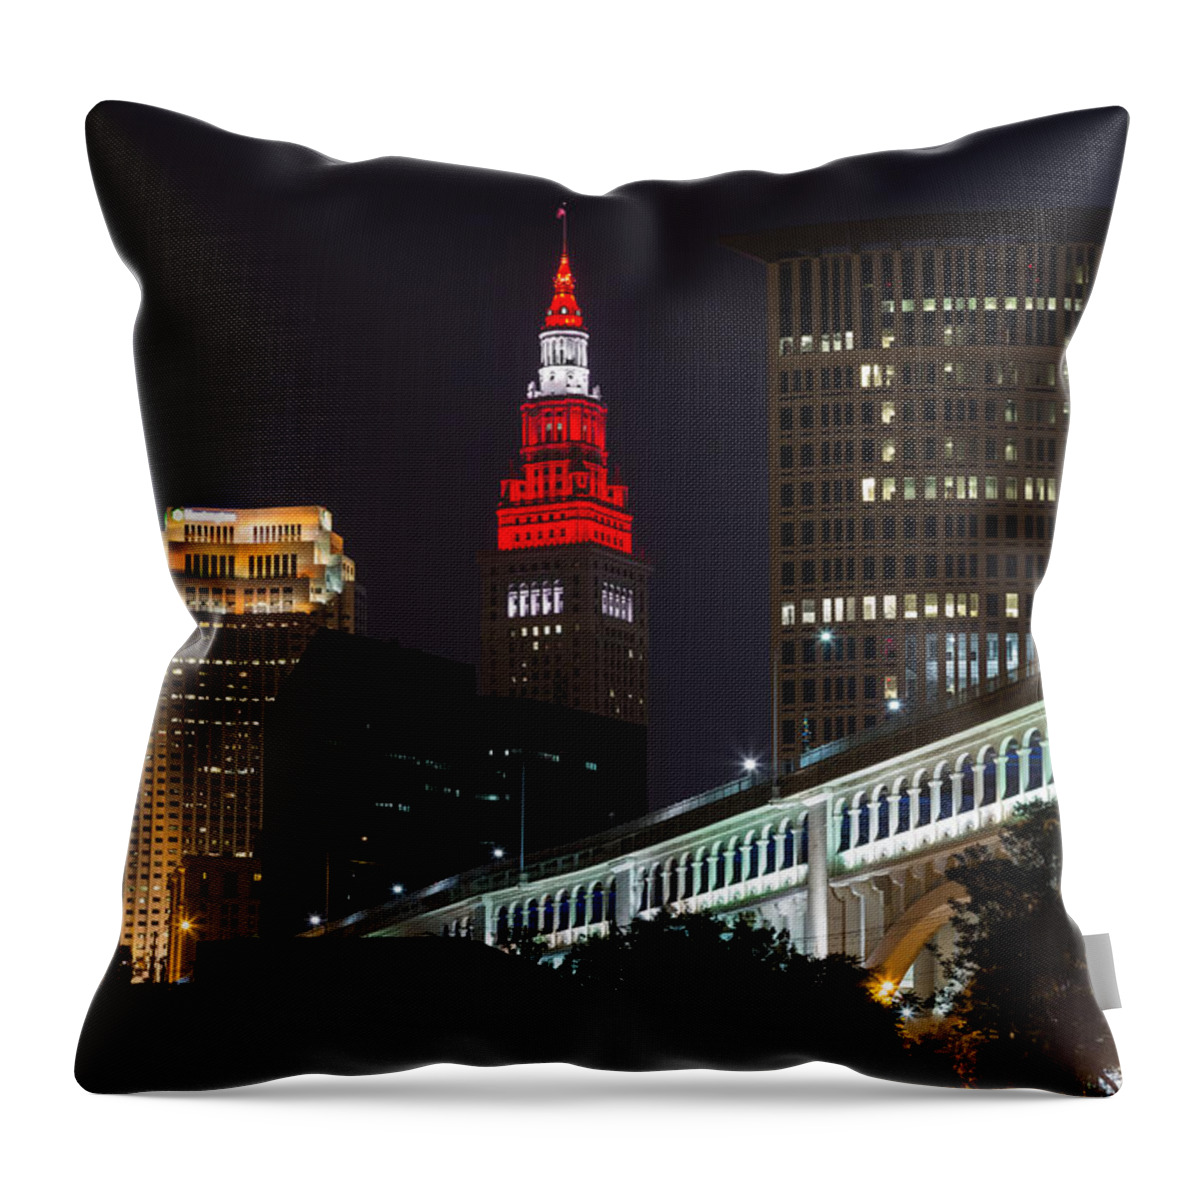 Scarlet And Gray Throw Pillow featuring the photograph Scarlet And Gray by Dale Kincaid